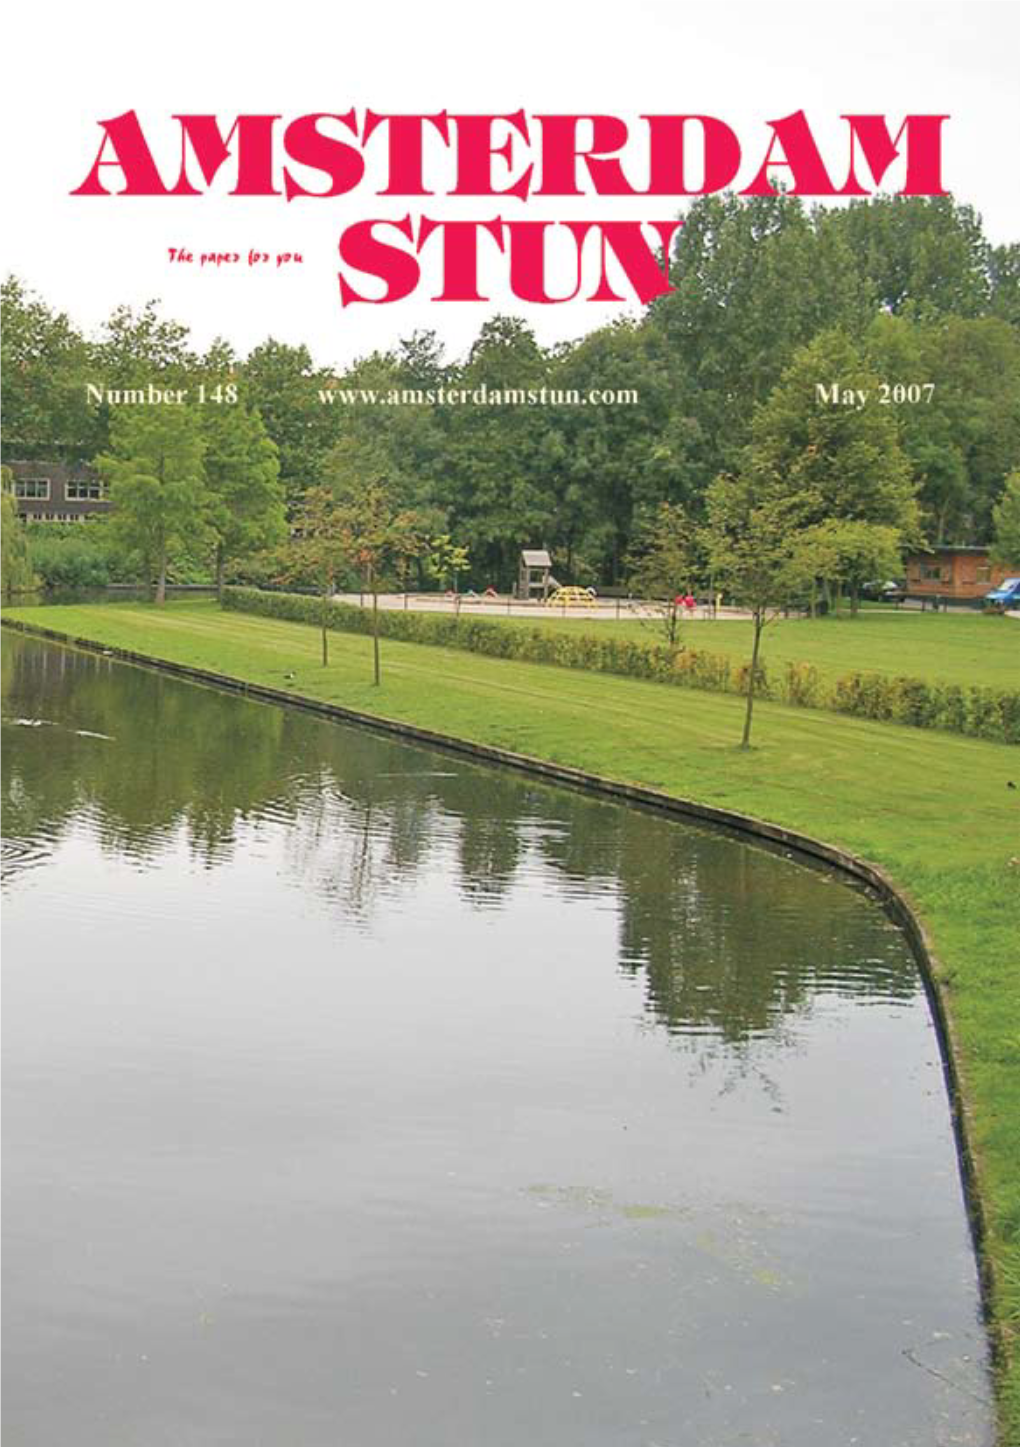 The Amsterdam Stun’, the Publisher Accepts Correct Entries in the Next Stun